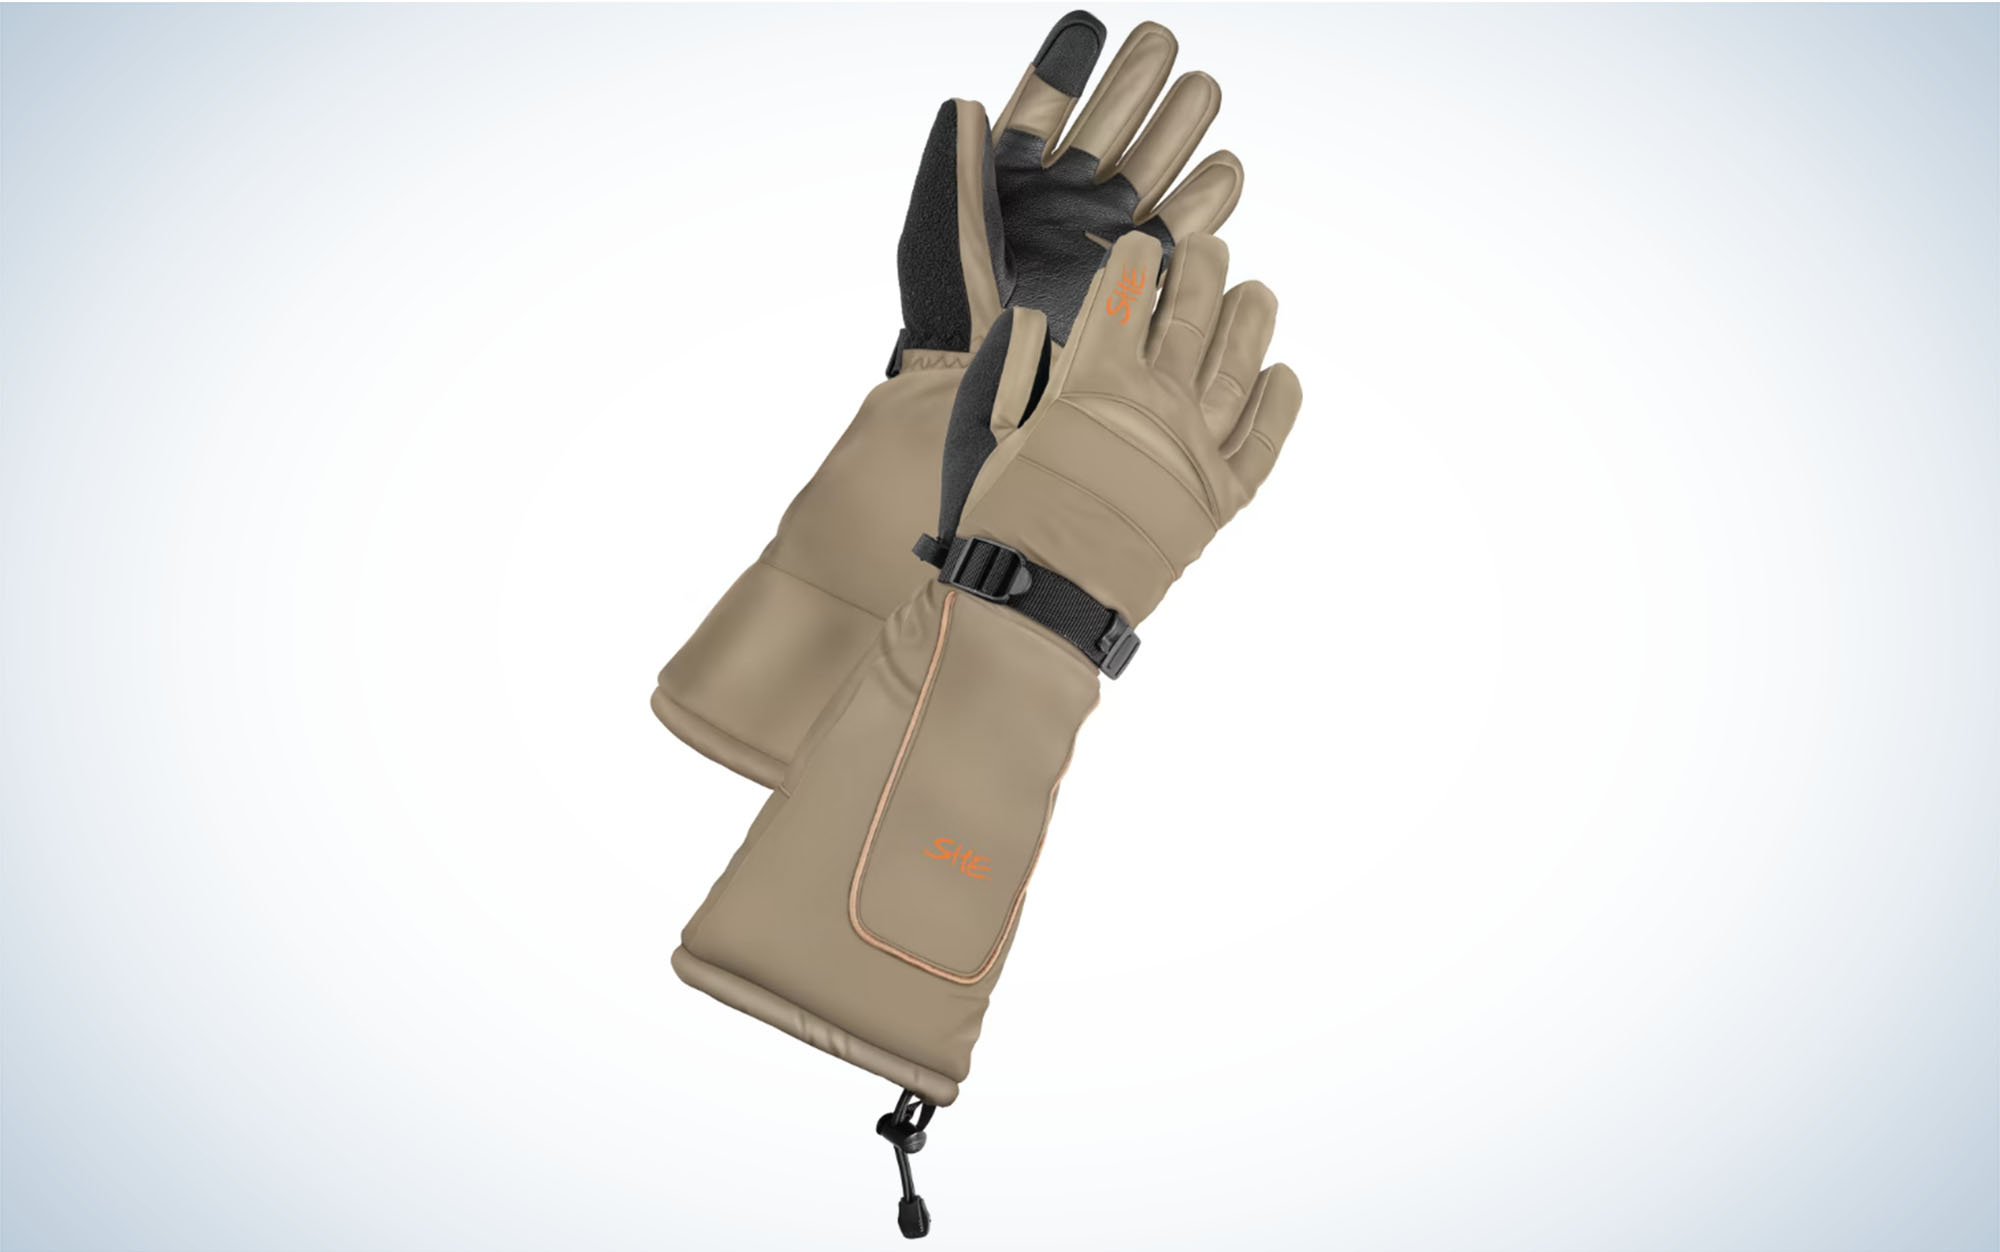 The SHE Outdoor Waterfowl Gauntlet Gloves are the best gift for waterfowl hunters.